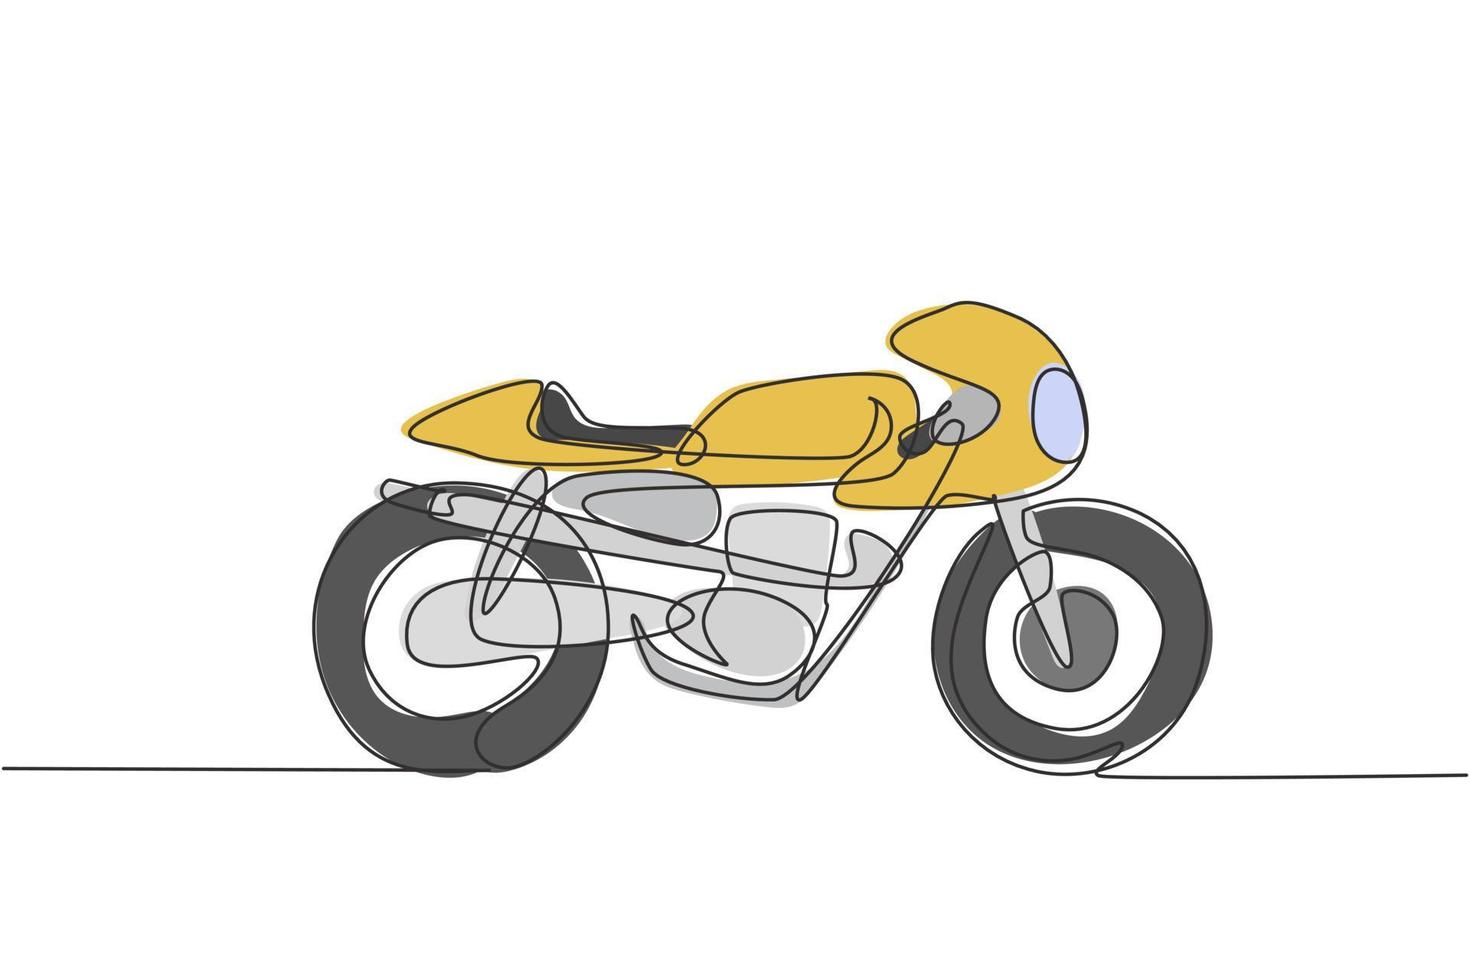 One single line drawing of old retro vintage motorcycle. Vintage motorbike transportation concept continuous line draw design graphic vector illustration